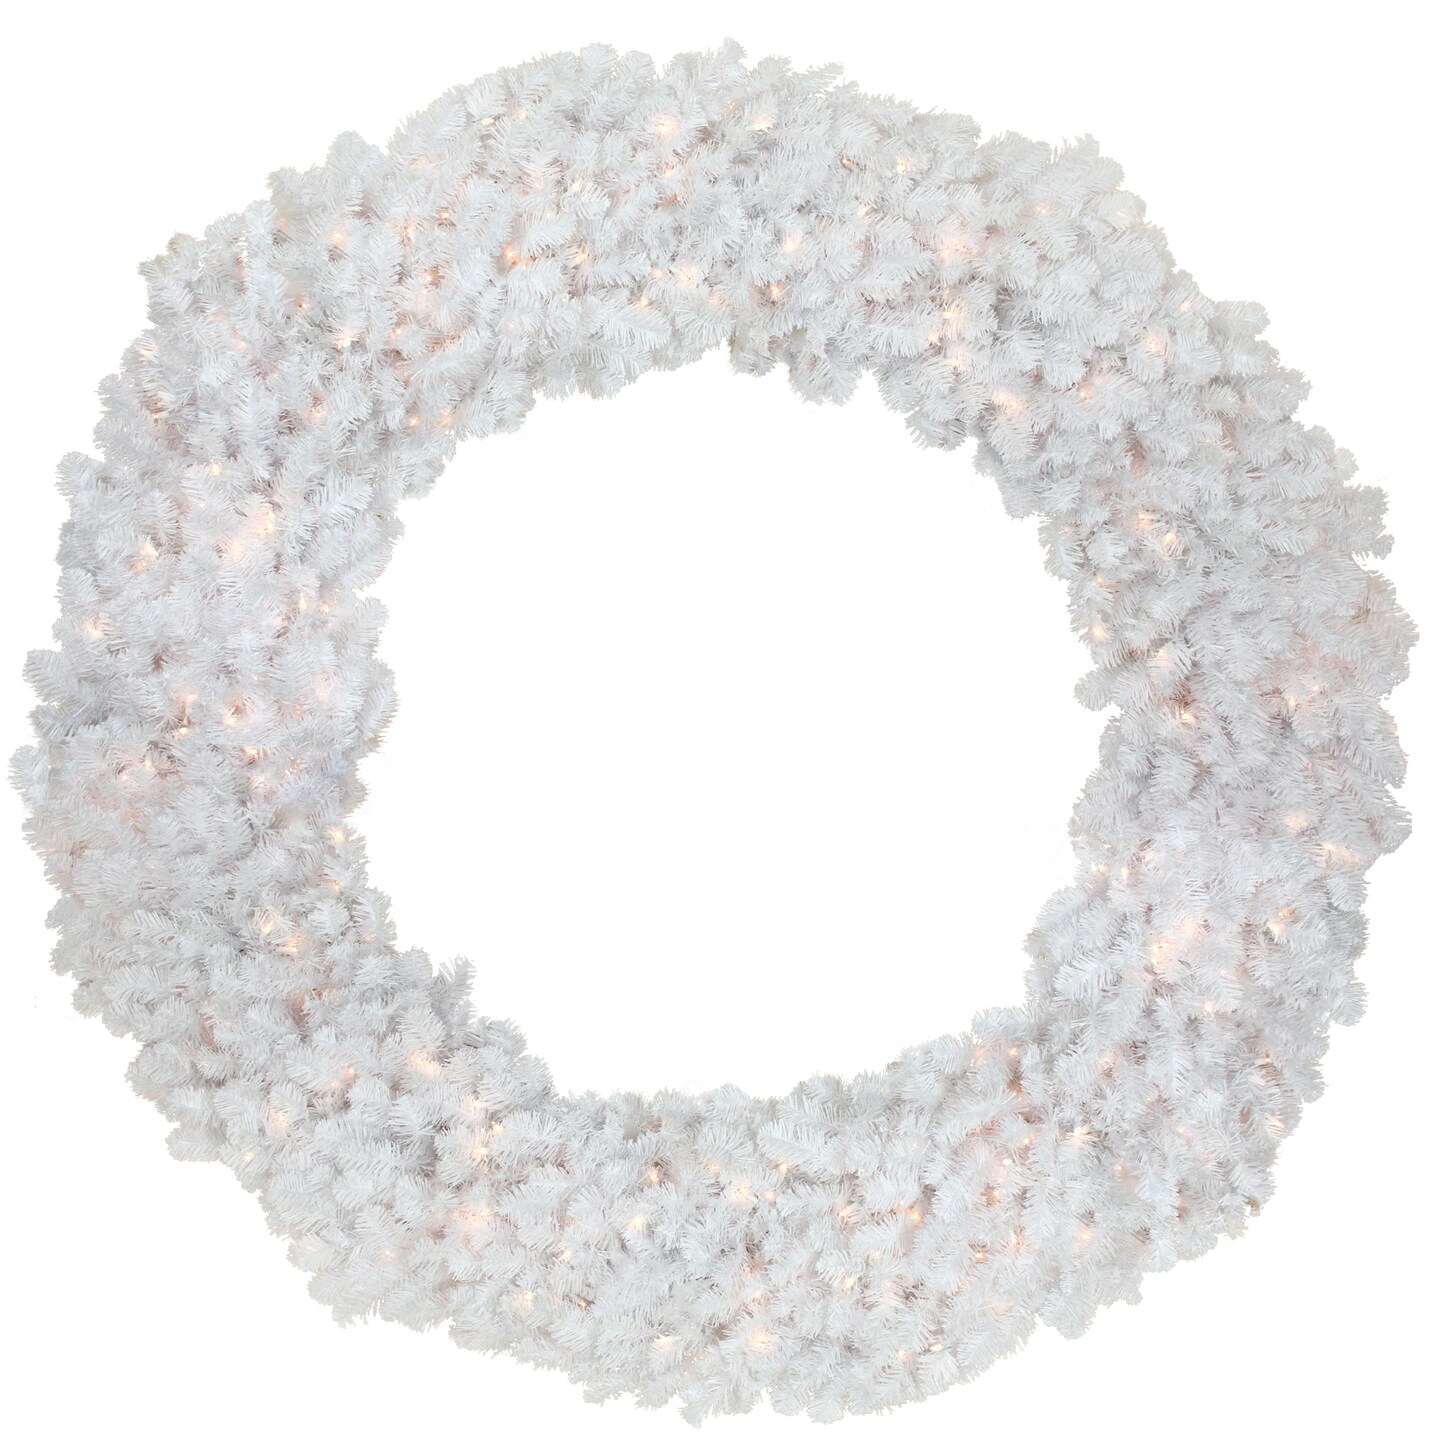 Northlight Pre-Lit White Commercial Snow White Pine Artificial Christmas Wreath - 6-Foot, Clear Lights